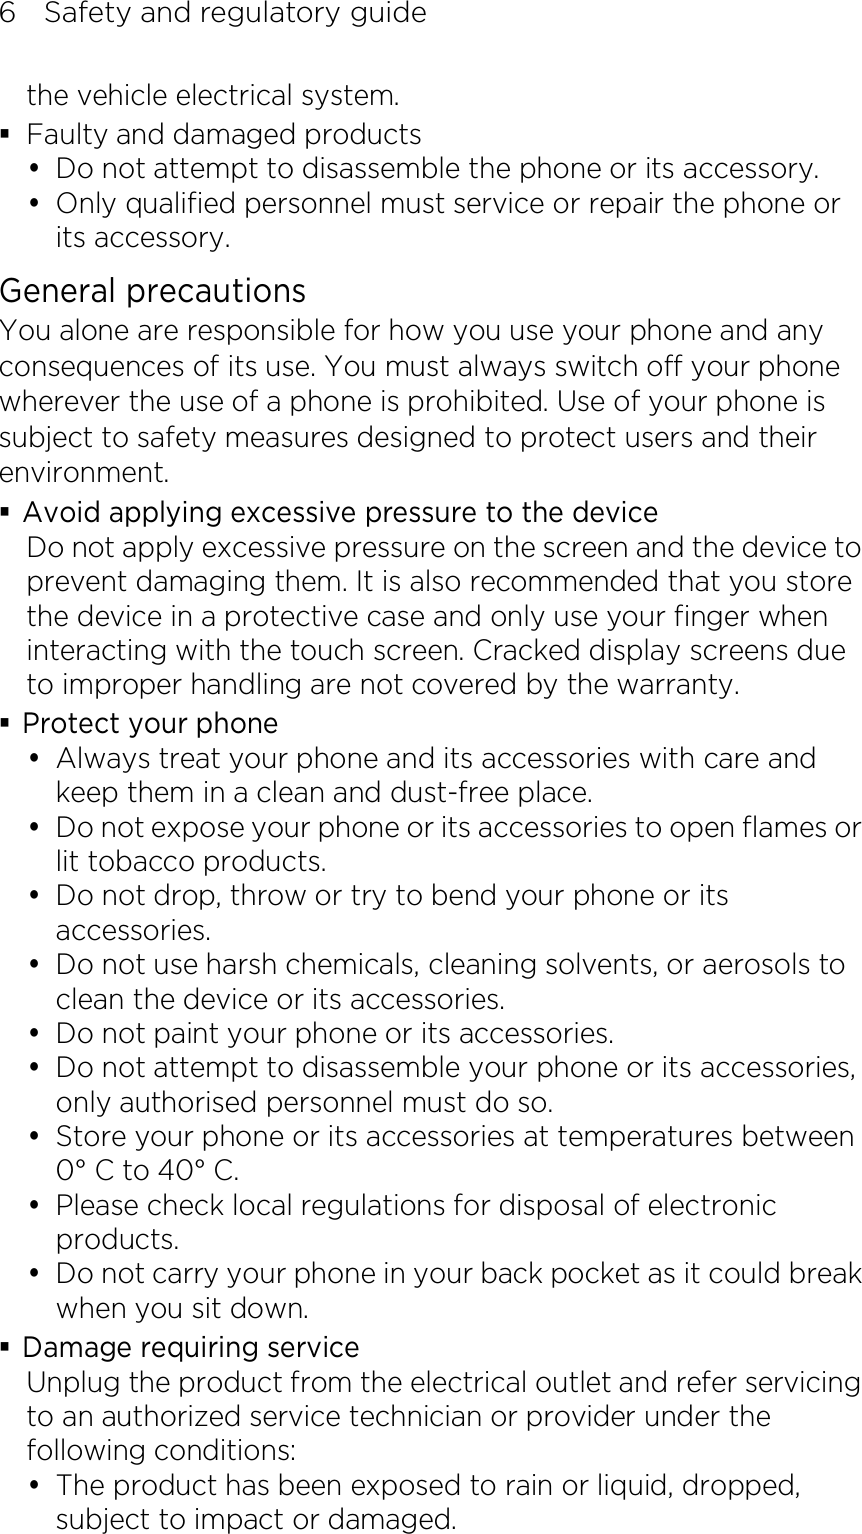 6    Safety and regulatory guide the vehicle electrical system.  Faulty and damaged products  Do not attempt to disassemble the phone or its accessory.  Only qualified personnel must service or repair the phone or its accessory. General precautions You alone are responsible for how you use your phone and any consequences of its use. You must always switch off your phone wherever the use of a phone is prohibited. Use of your phone is subject to safety measures designed to protect users and their environment.  Avoid applying excessive pressure to the device Do not apply excessive pressure on the screen and the device to prevent damaging them. It is also recommended that you store the device in a protective case and only use your finger when interacting with the touch screen. Cracked display screens due to improper handling are not covered by the warranty.  Protect your phone  Always treat your phone and its accessories with care and keep them in a clean and dust-free place.  Do not expose your phone or its accessories to open flames or lit tobacco products.  Do not drop, throw or try to bend your phone or its accessories.  Do not use harsh chemicals, cleaning solvents, or aerosols to clean the device or its accessories.  Do not paint your phone or its accessories.  Do not attempt to disassemble your phone or its accessories, only authorised personnel must do so.  Store your phone or its accessories at temperatures between 0° C to 40° C.  Please check local regulations for disposal of electronic products.  Do not carry your phone in your back pocket as it could break when you sit down.  Damage requiring service Unplug the product from the electrical outlet and refer servicing to an authorized service technician or provider under the following conditions:  The product has been exposed to rain or liquid, dropped, subject to impact or damaged. 